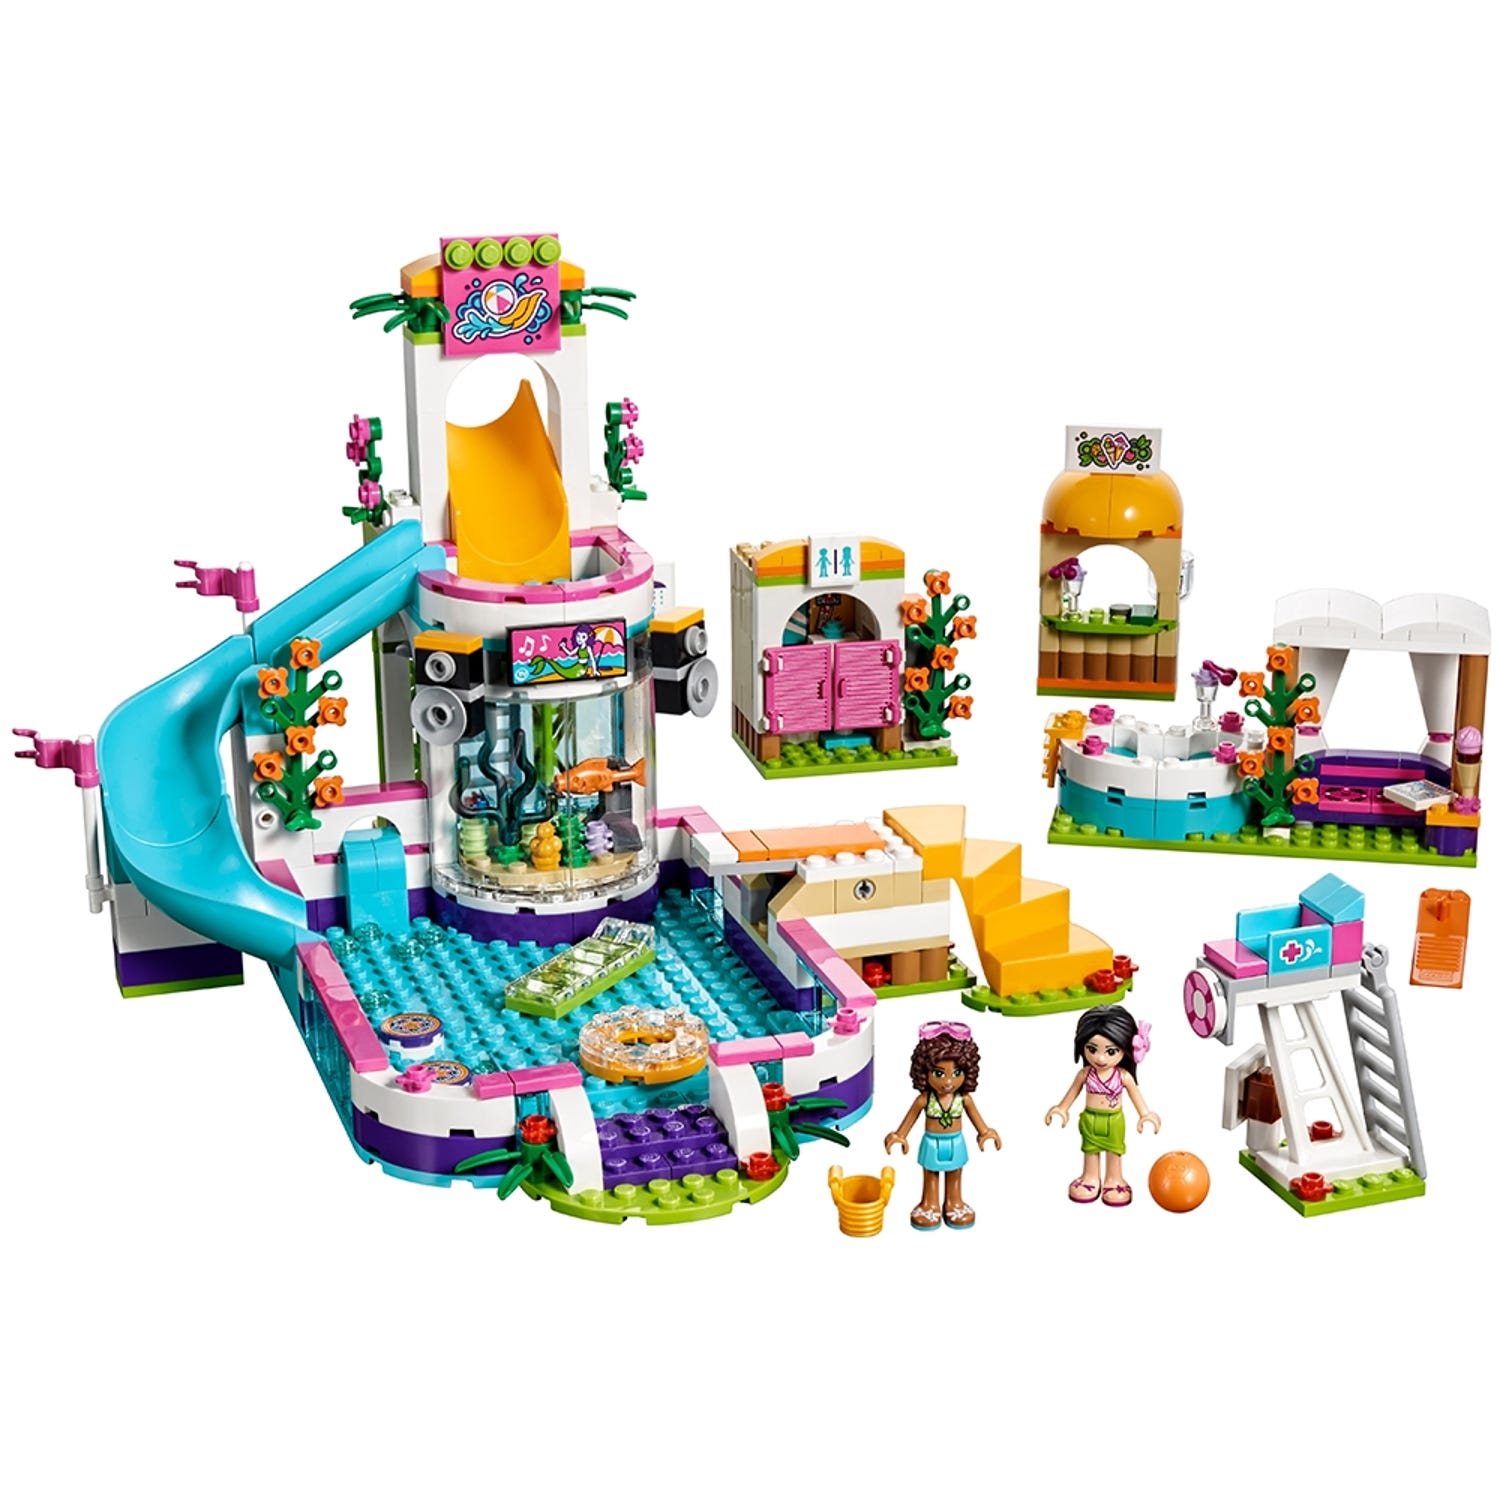 lego maison piscine for Sale,Up To OFF 74%